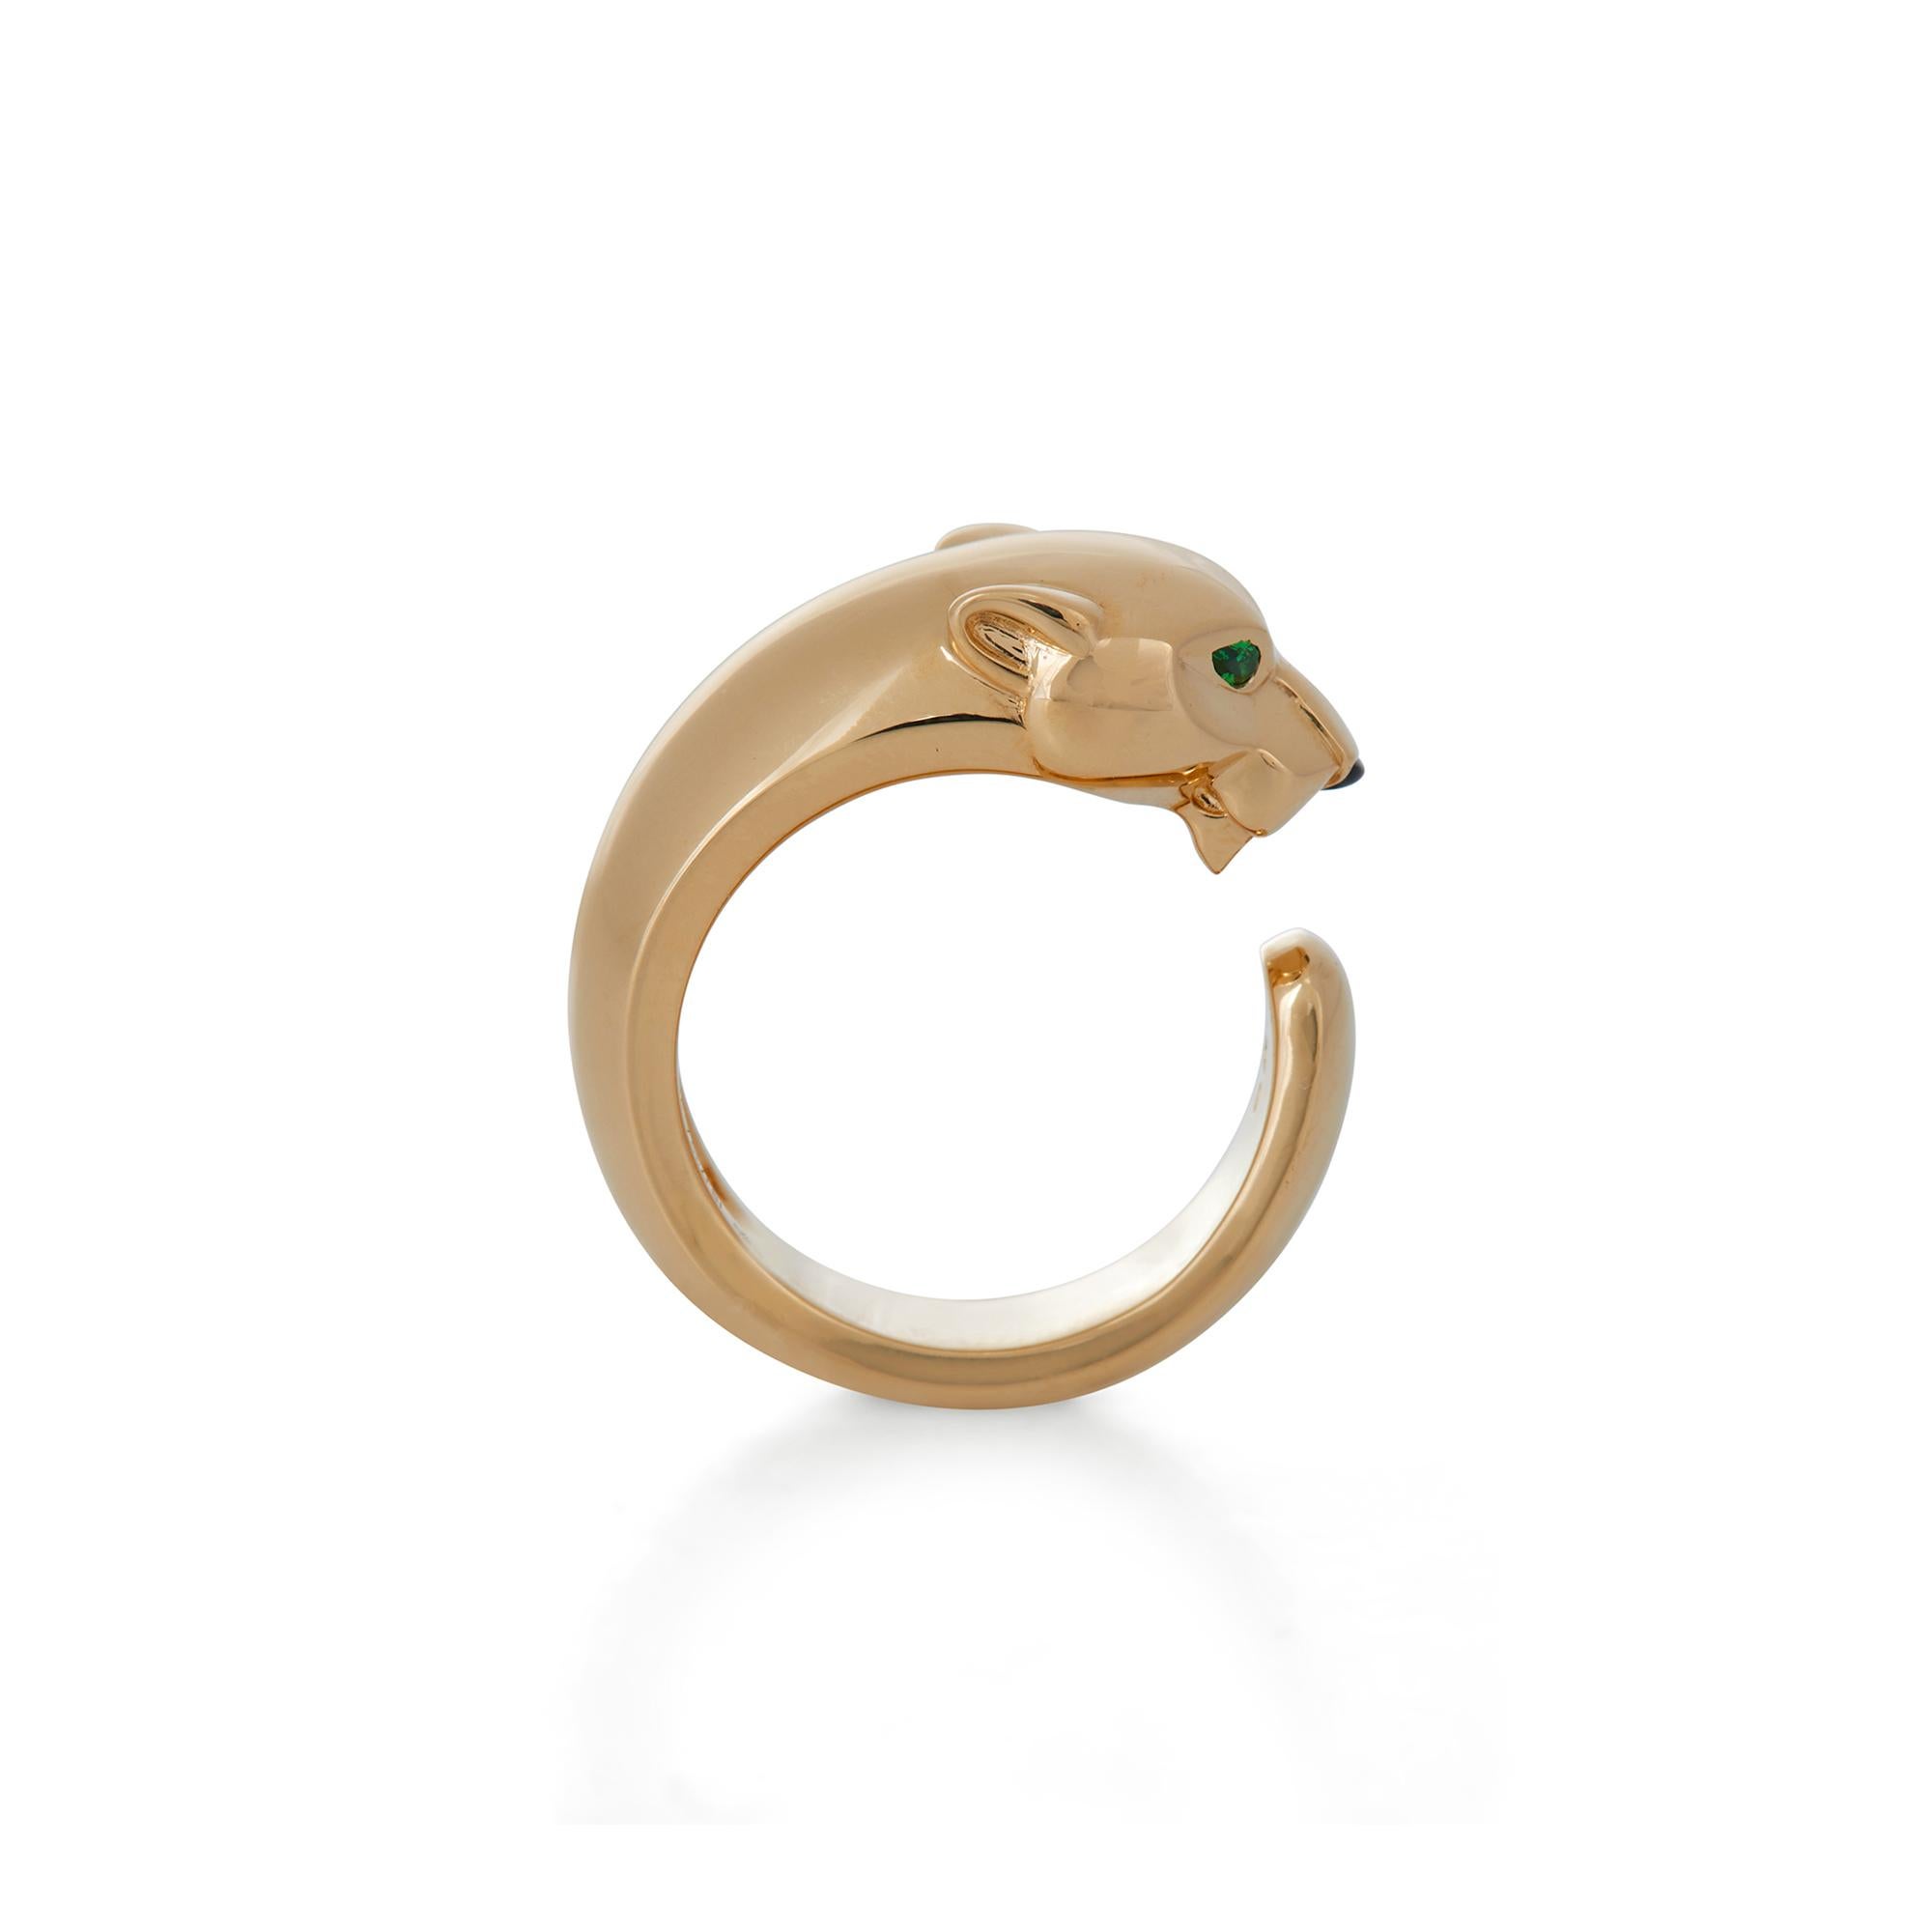 Authentic Panthère de Cartier ring crafted in 18 karat yellow gold. The panther head motif is set with tsavorite garnet eyes and a carved onyx nose and measures 11mm in width.  Size 51, US 5 3/4.  Signed Cartier, 51, Au750, with serial number and